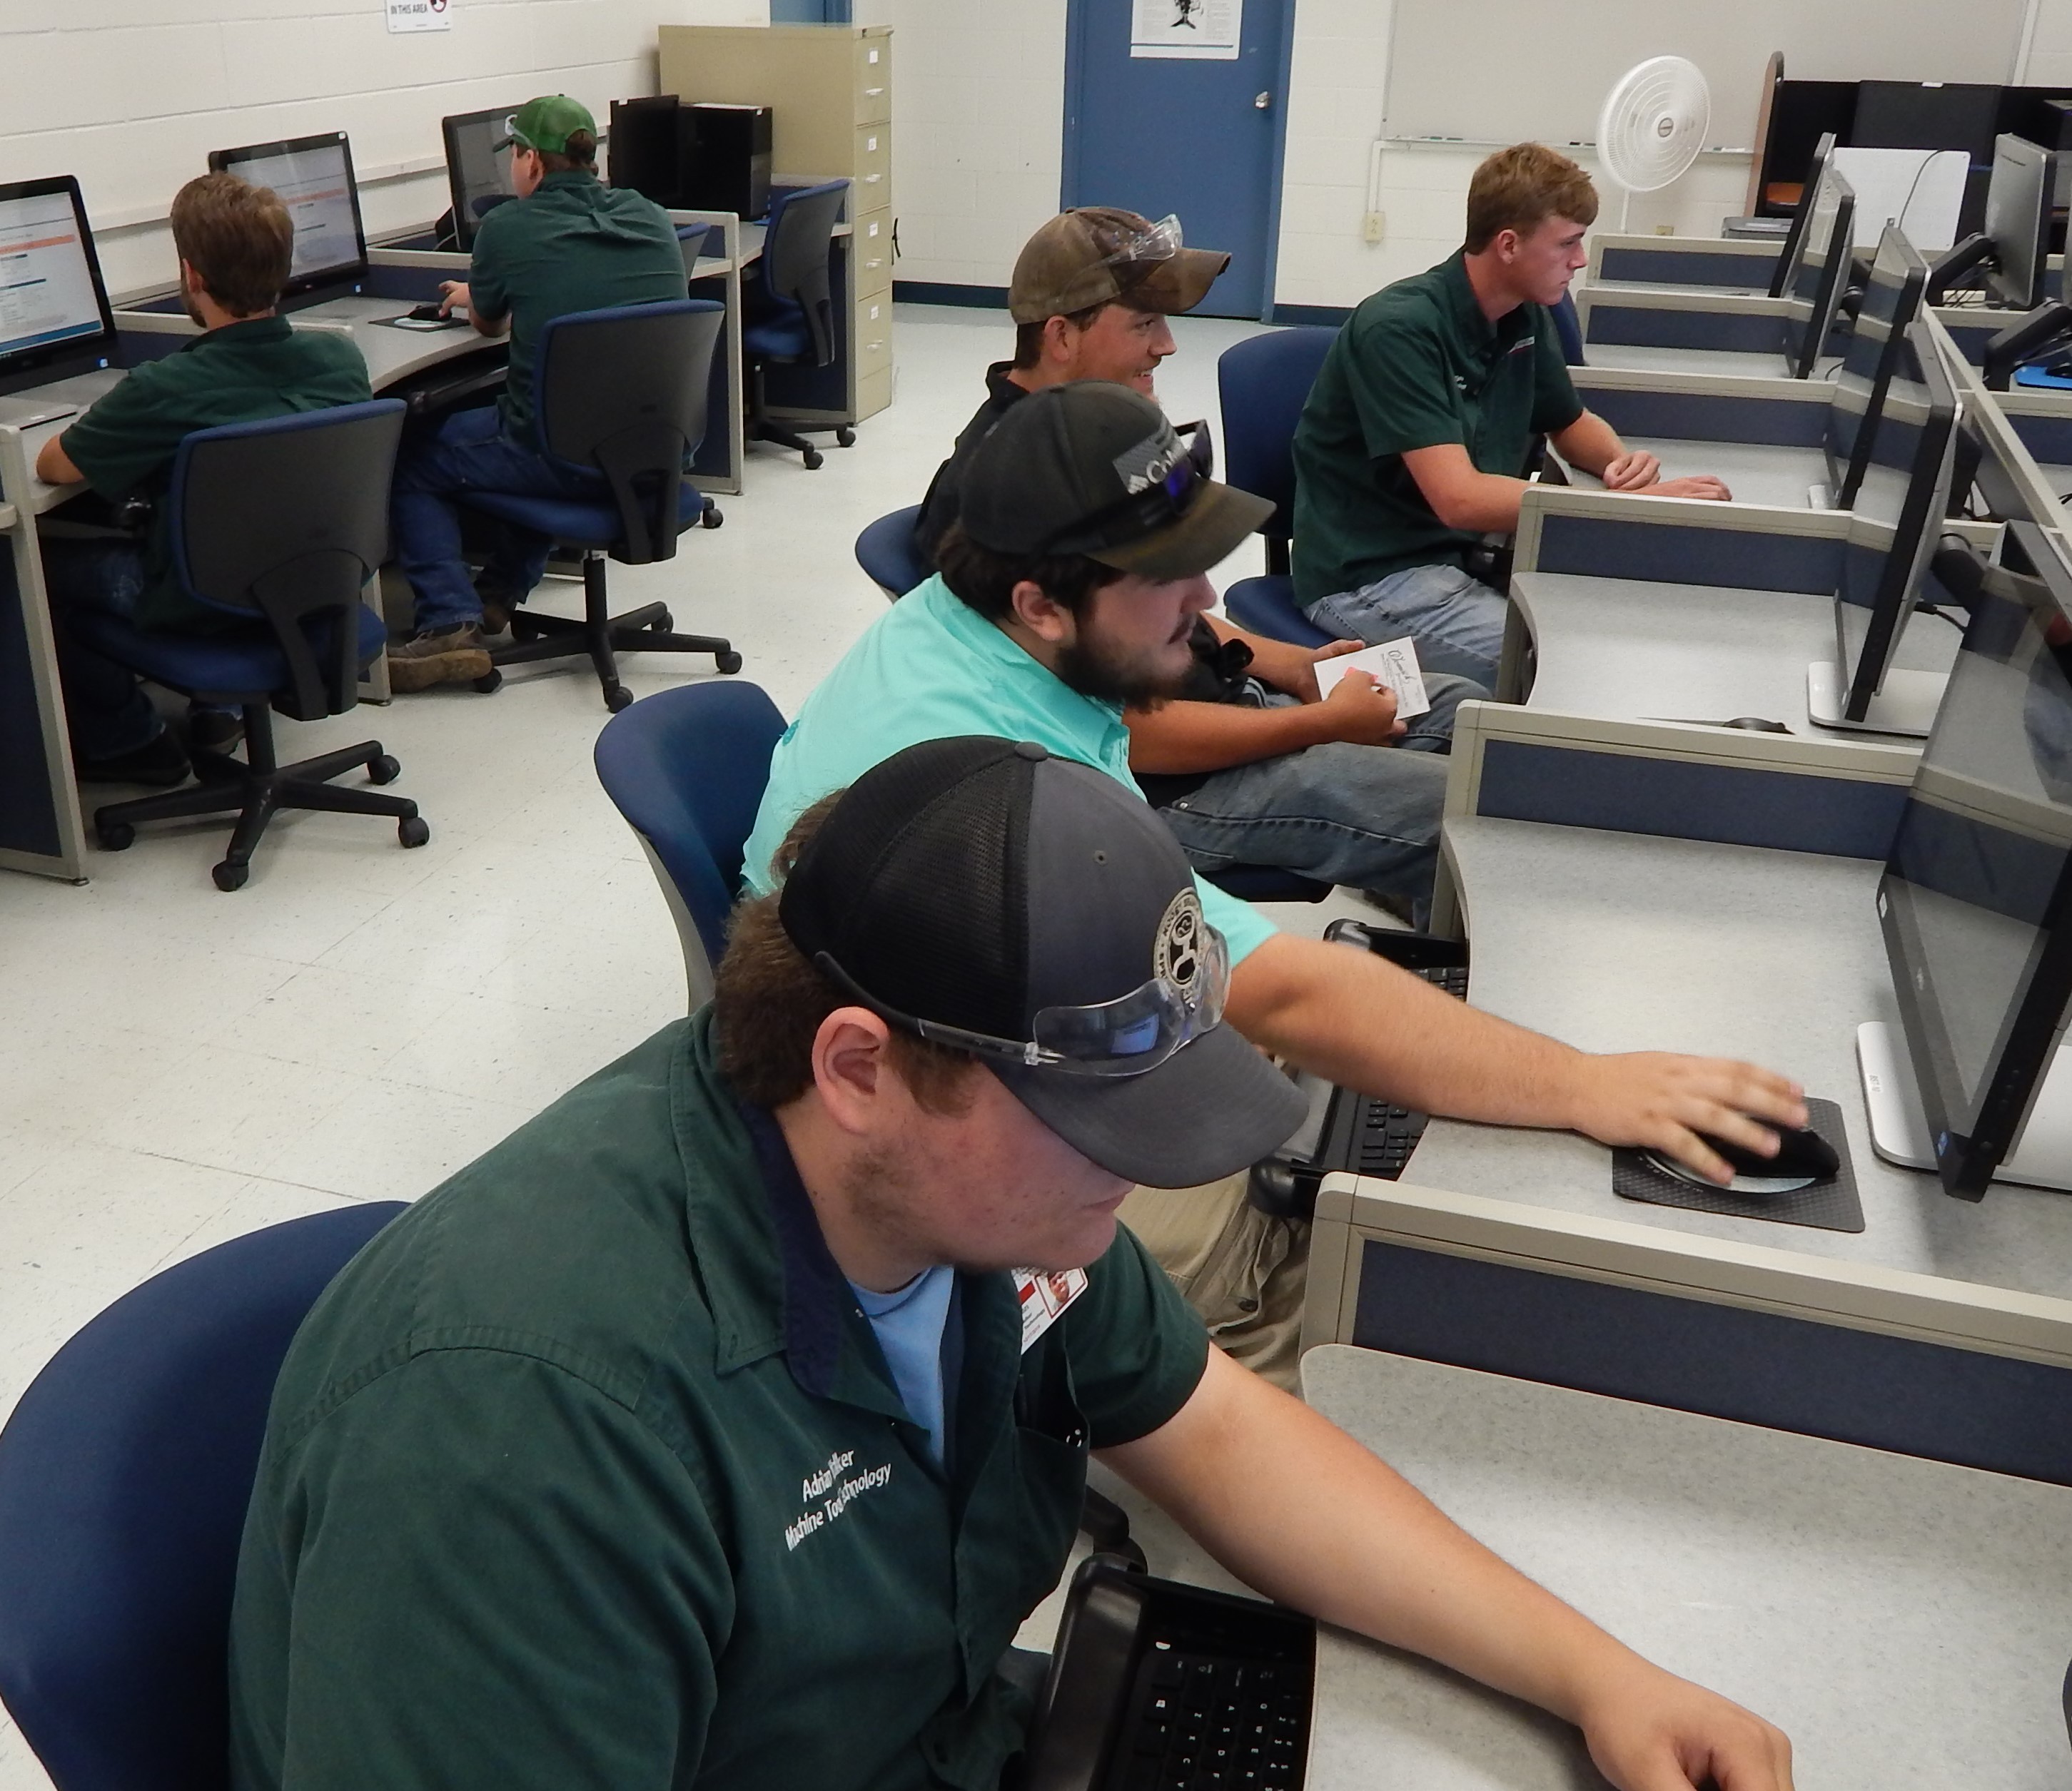 Registering are students from Machine Tool Technology, Welding, and Industrial Maintenance